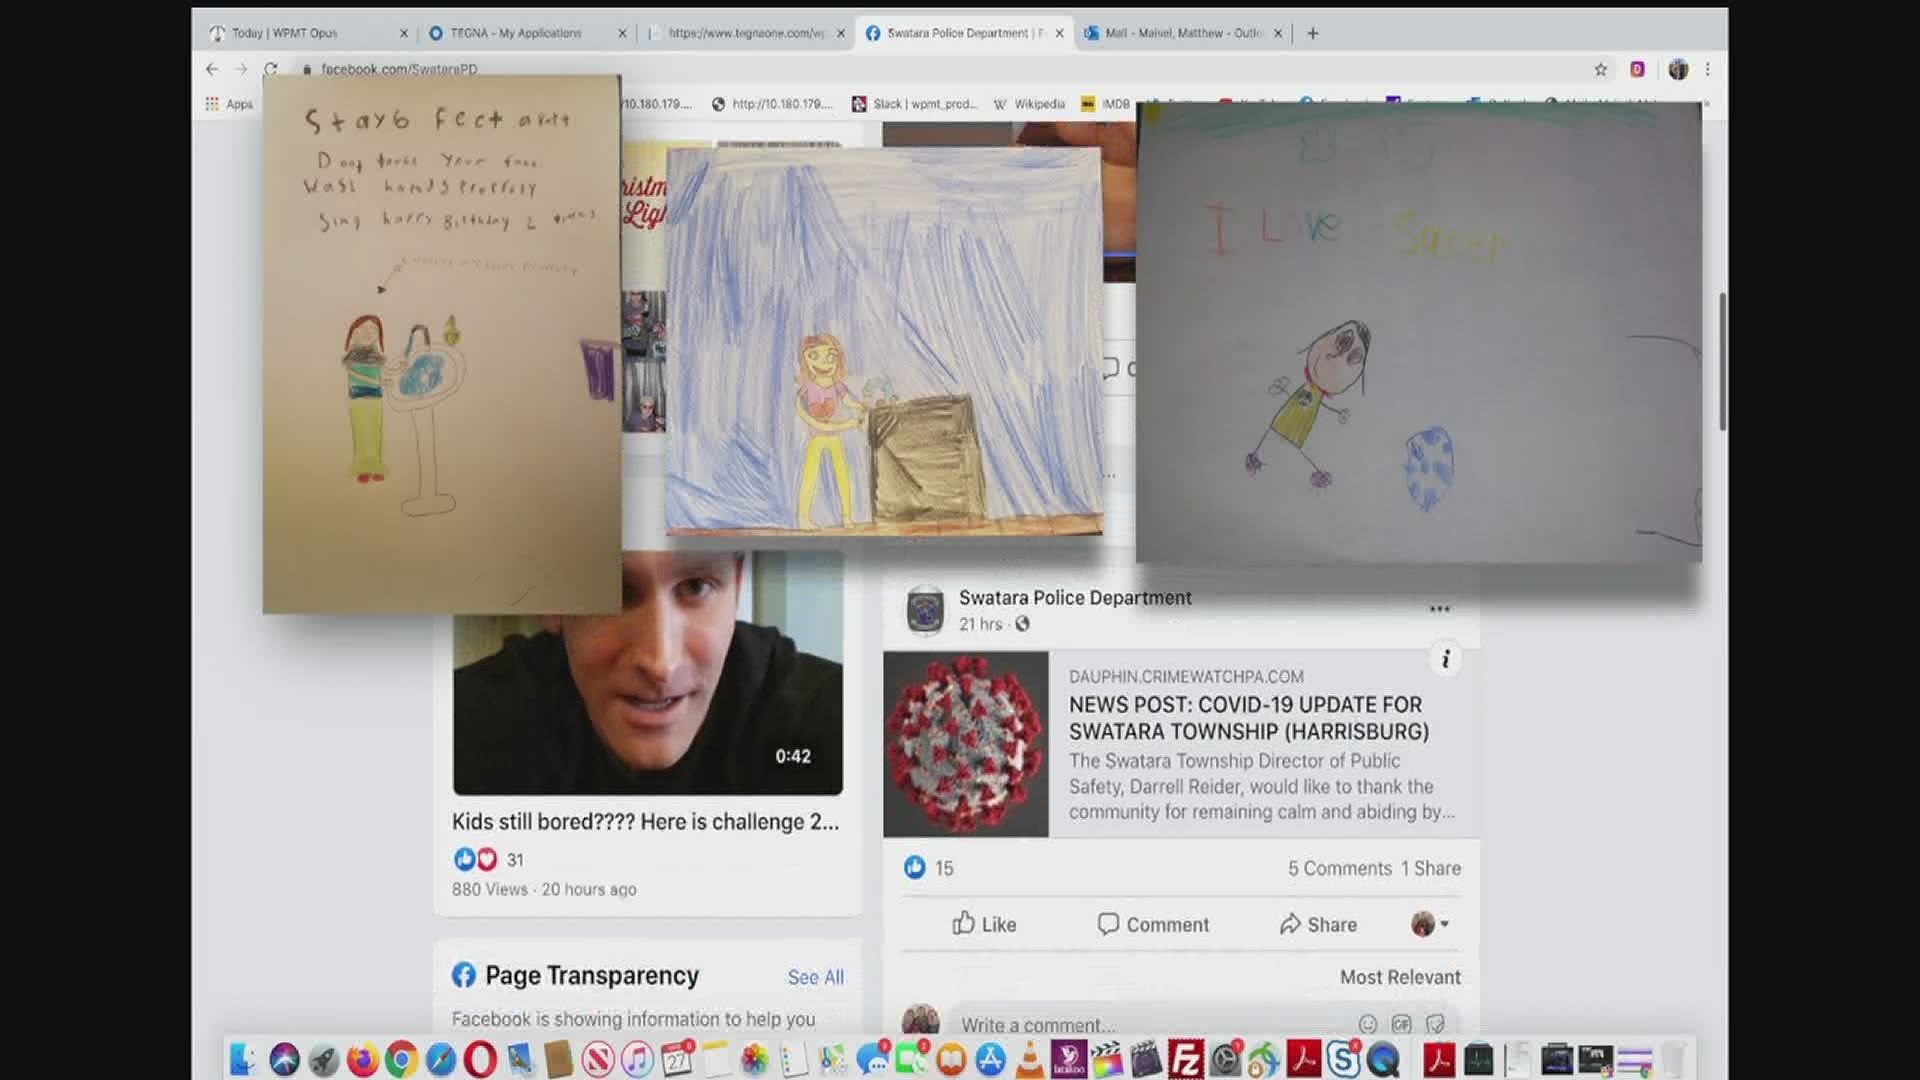 Every few days, the police department will post a new topic on its Facebook page, challenging kids to submit their best artwork on that topic.